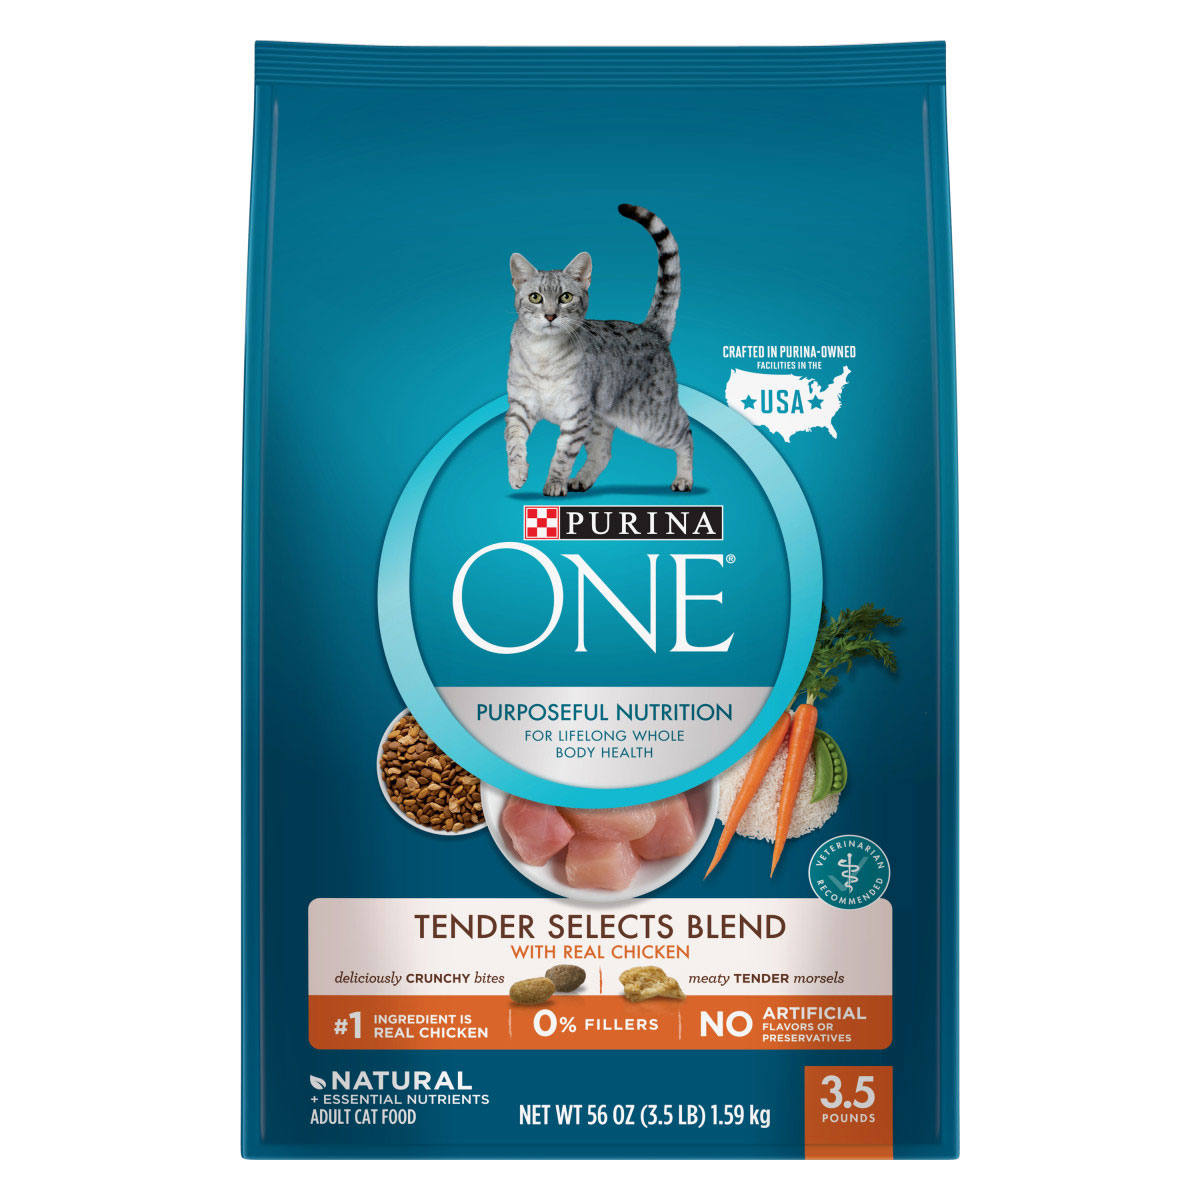 Purina One Cat Food Tender Selects Chicken 3.5lb